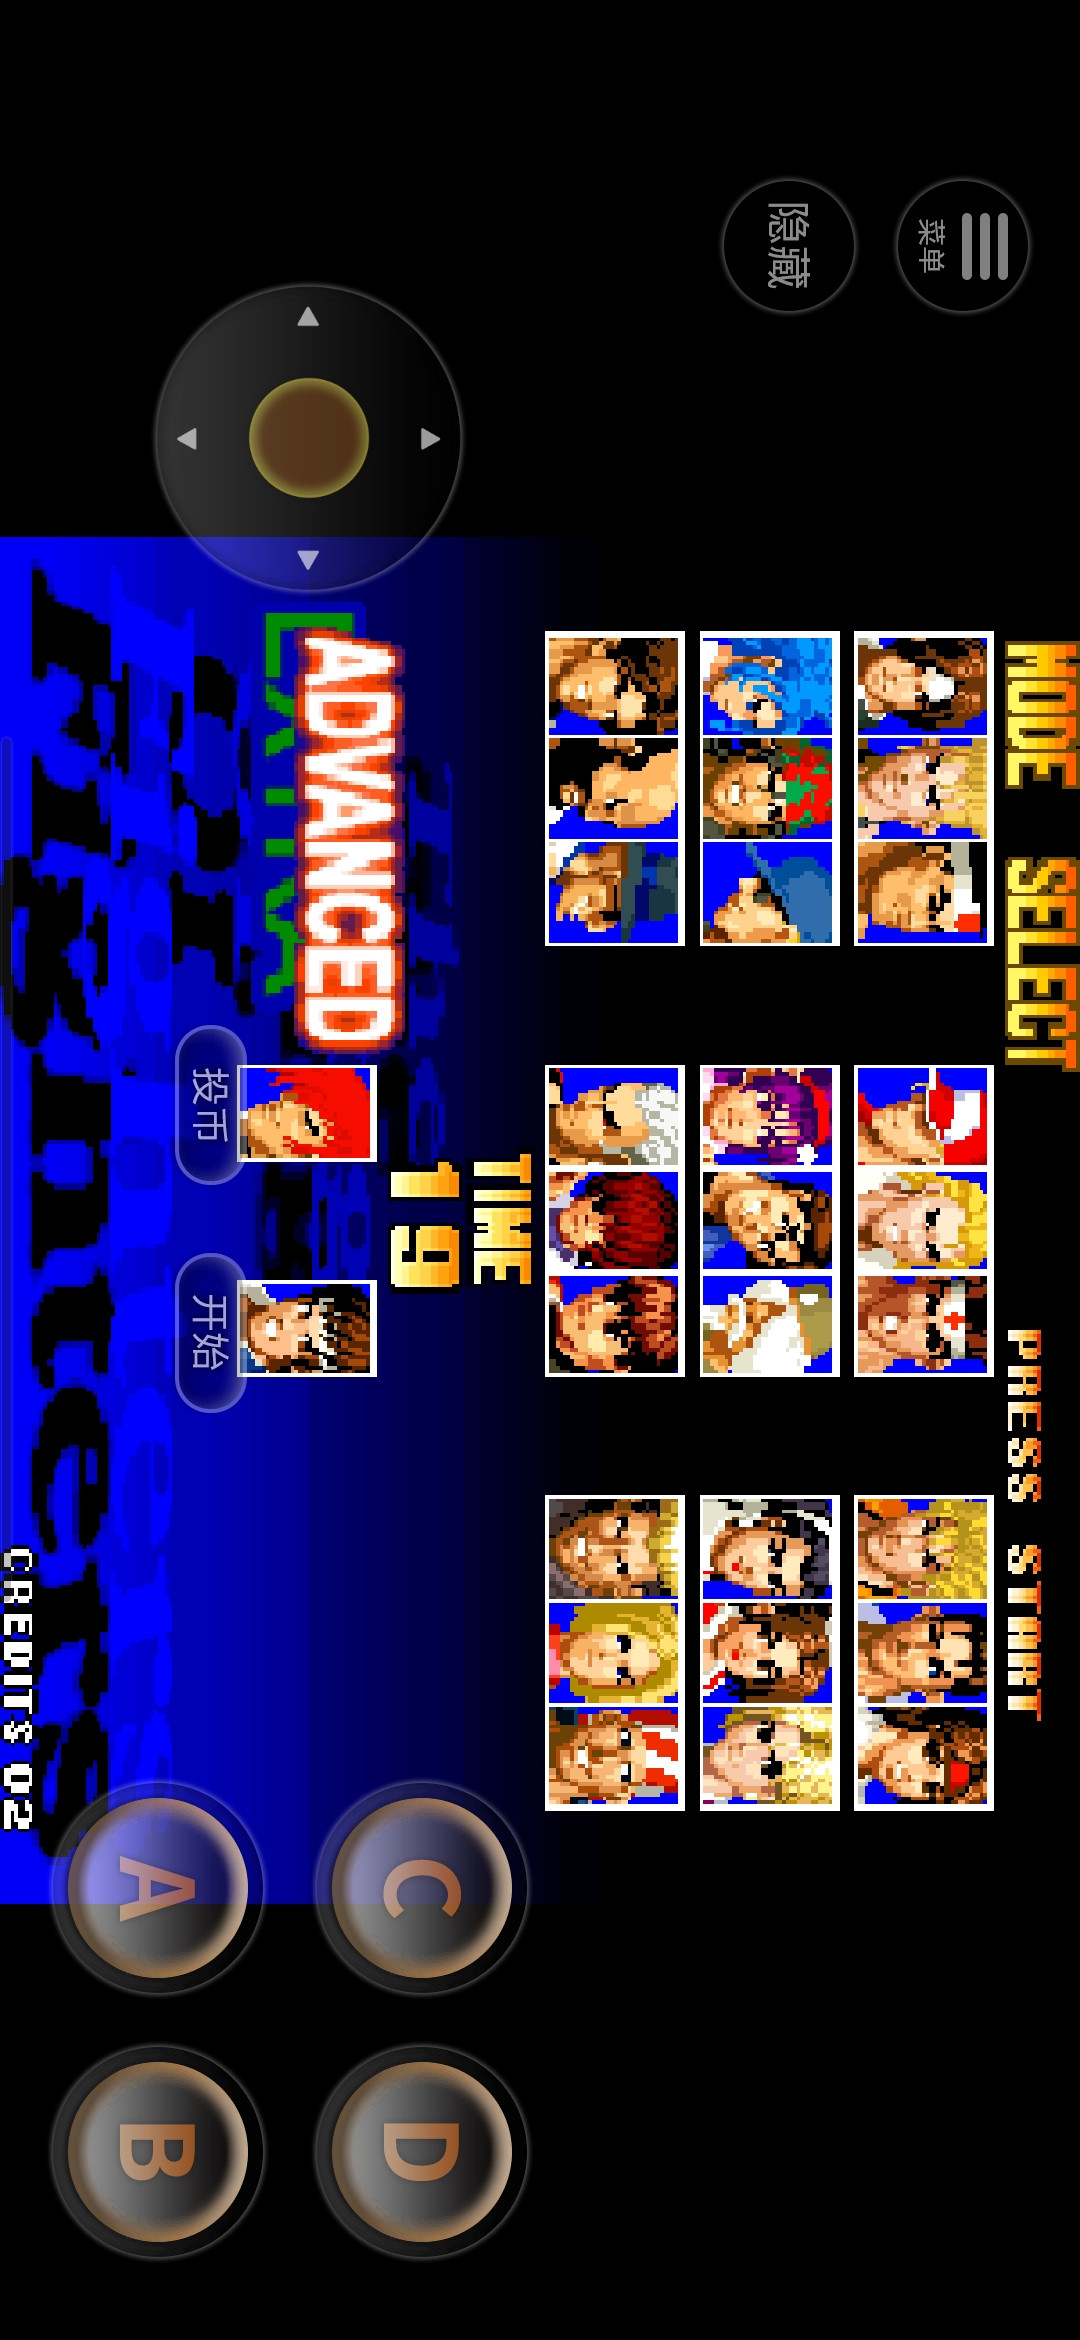 The king of fightrs 97(Arcade port)